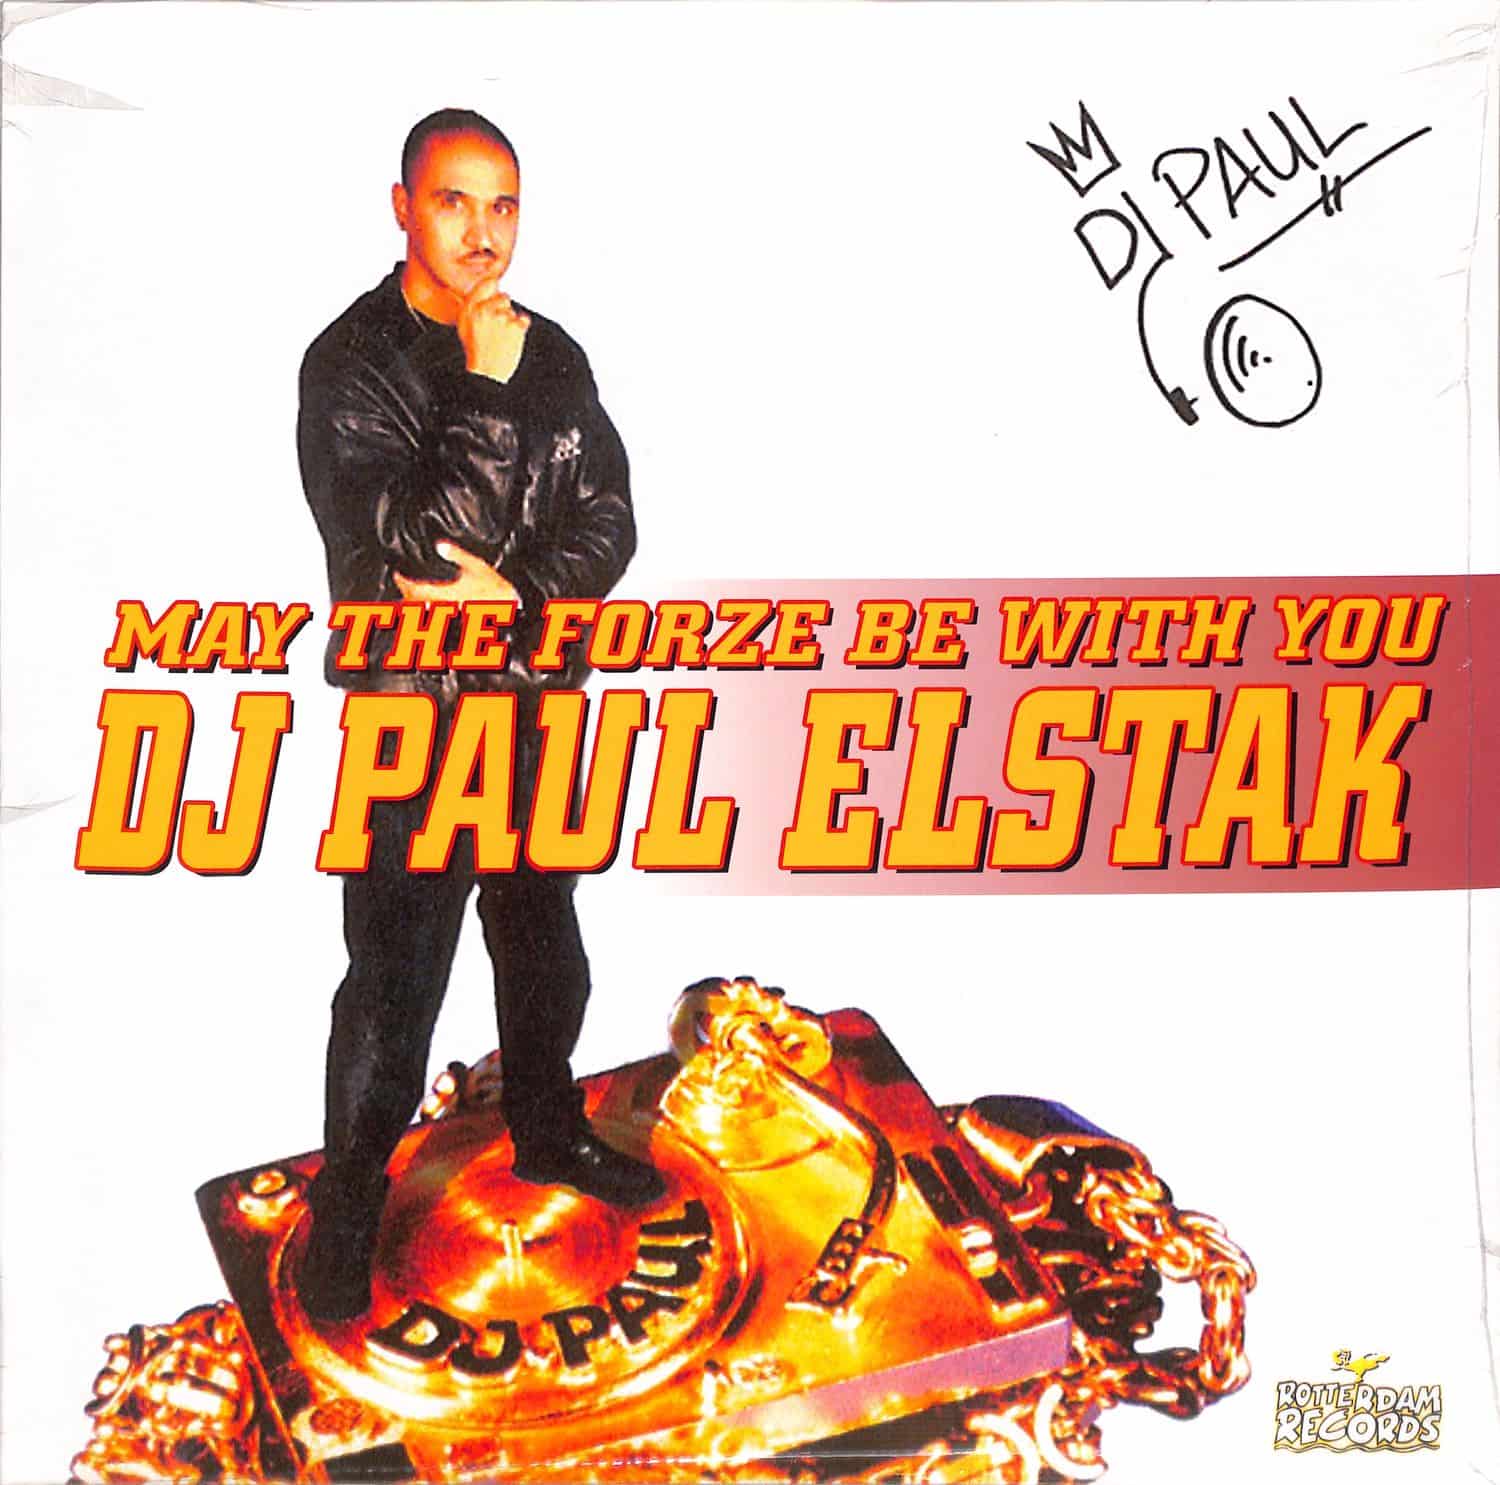 Paul Elstak - MAY THE FORZE BE WITH YOU 